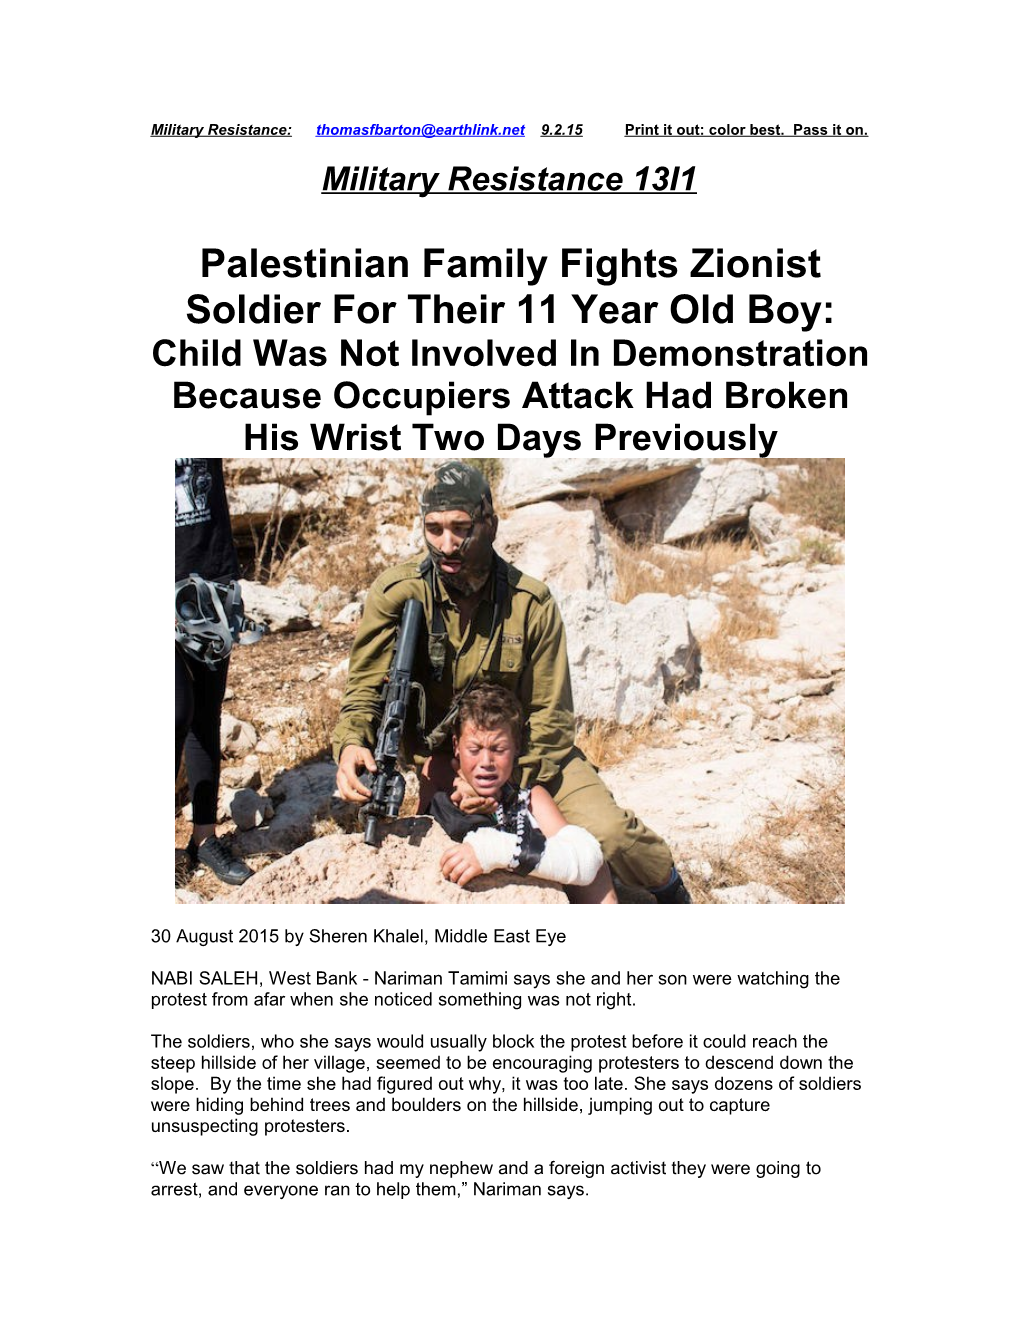 Palestinian Family Fights Zionist Soldier for Their 11 Year Old Boy